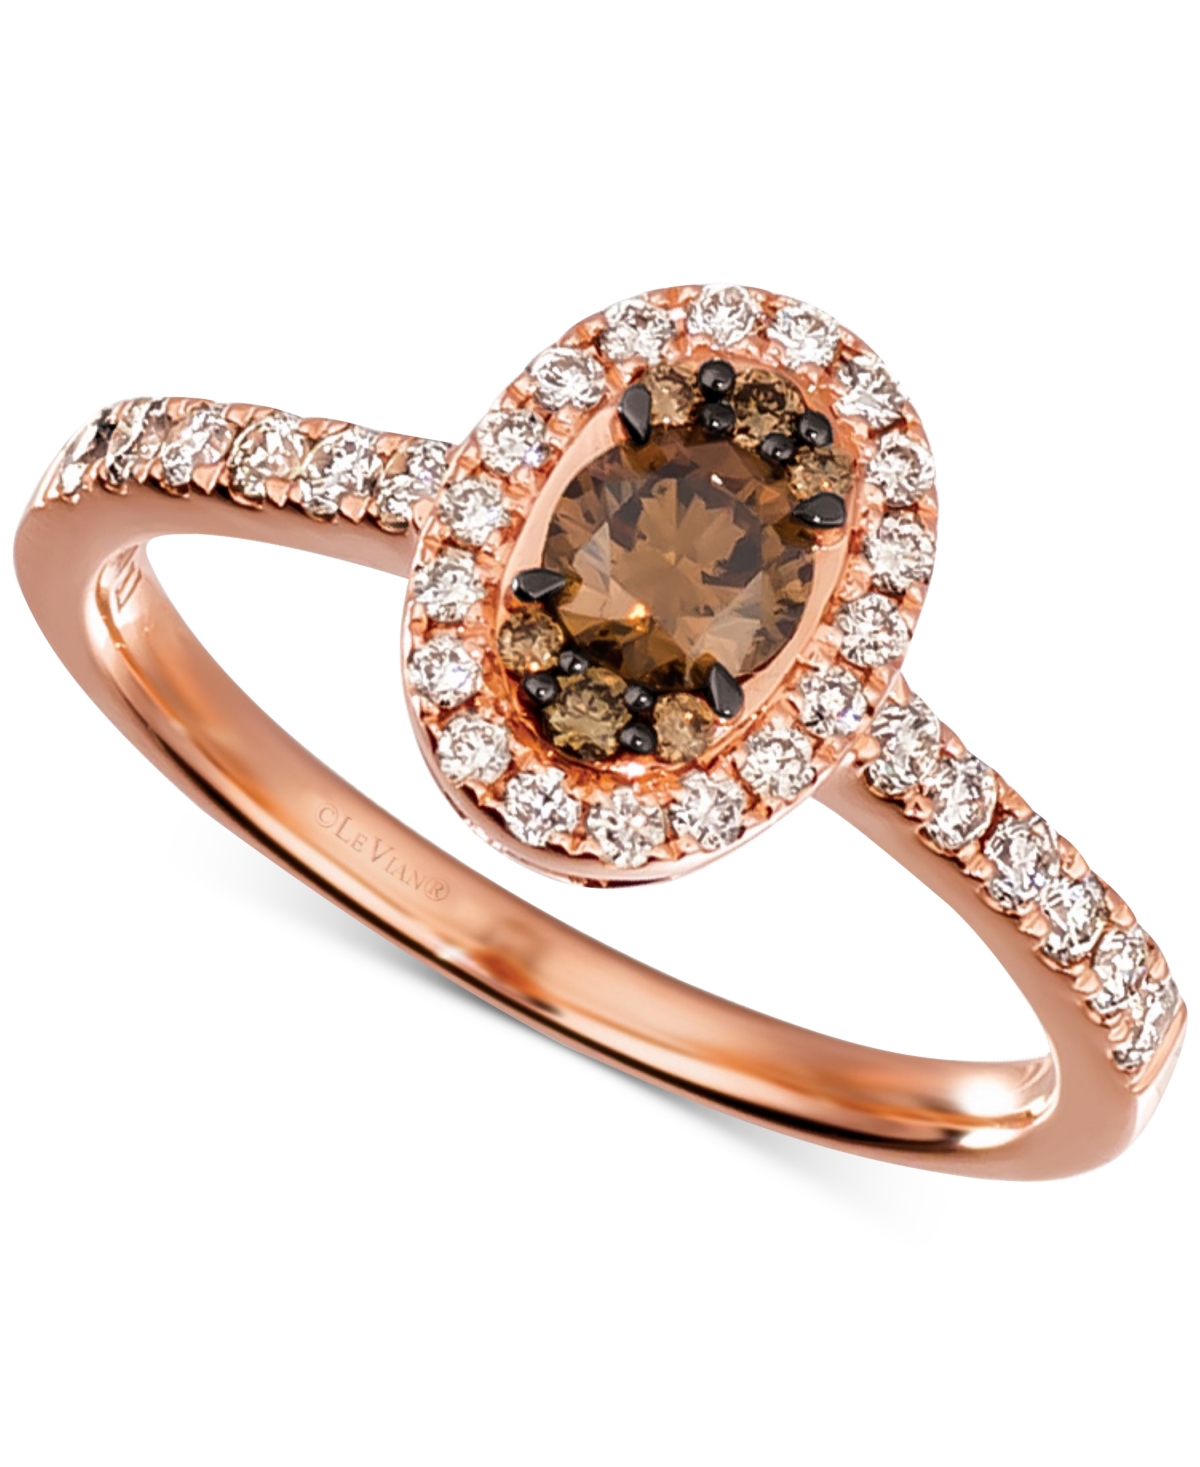 Le Vian Chocolate Diamond & Nude Diamond Halo Ring (5/8 Ct. T.w.) In 14k Rose Gold In K Strawberry Gold Ring